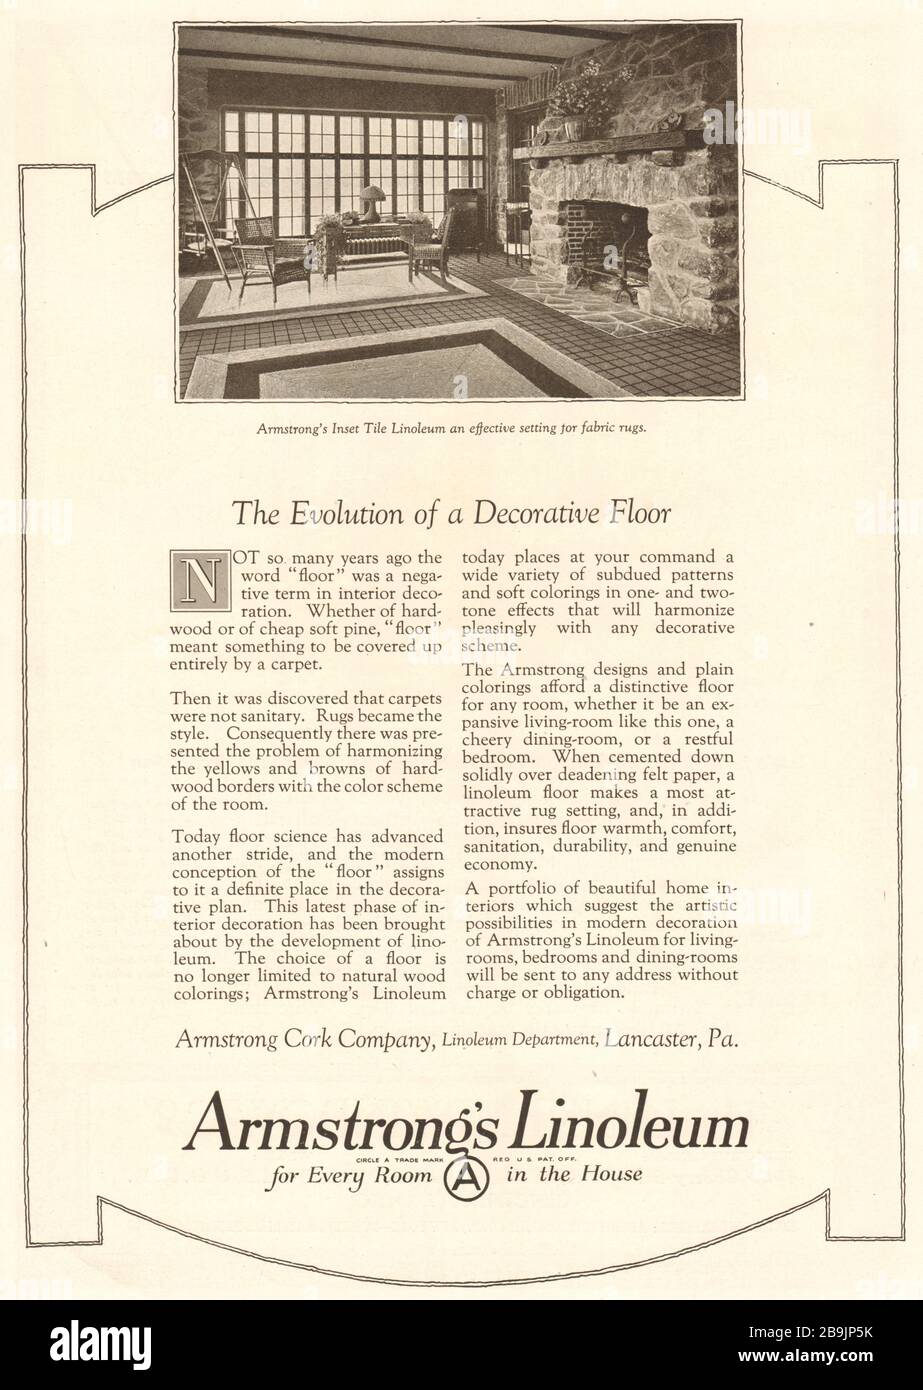 Armstrong's linoleum, for every room in the house. Amstrong Cork Company, Linoleum Department, Lancaster, Pennsylvania (1921) Stock Photo